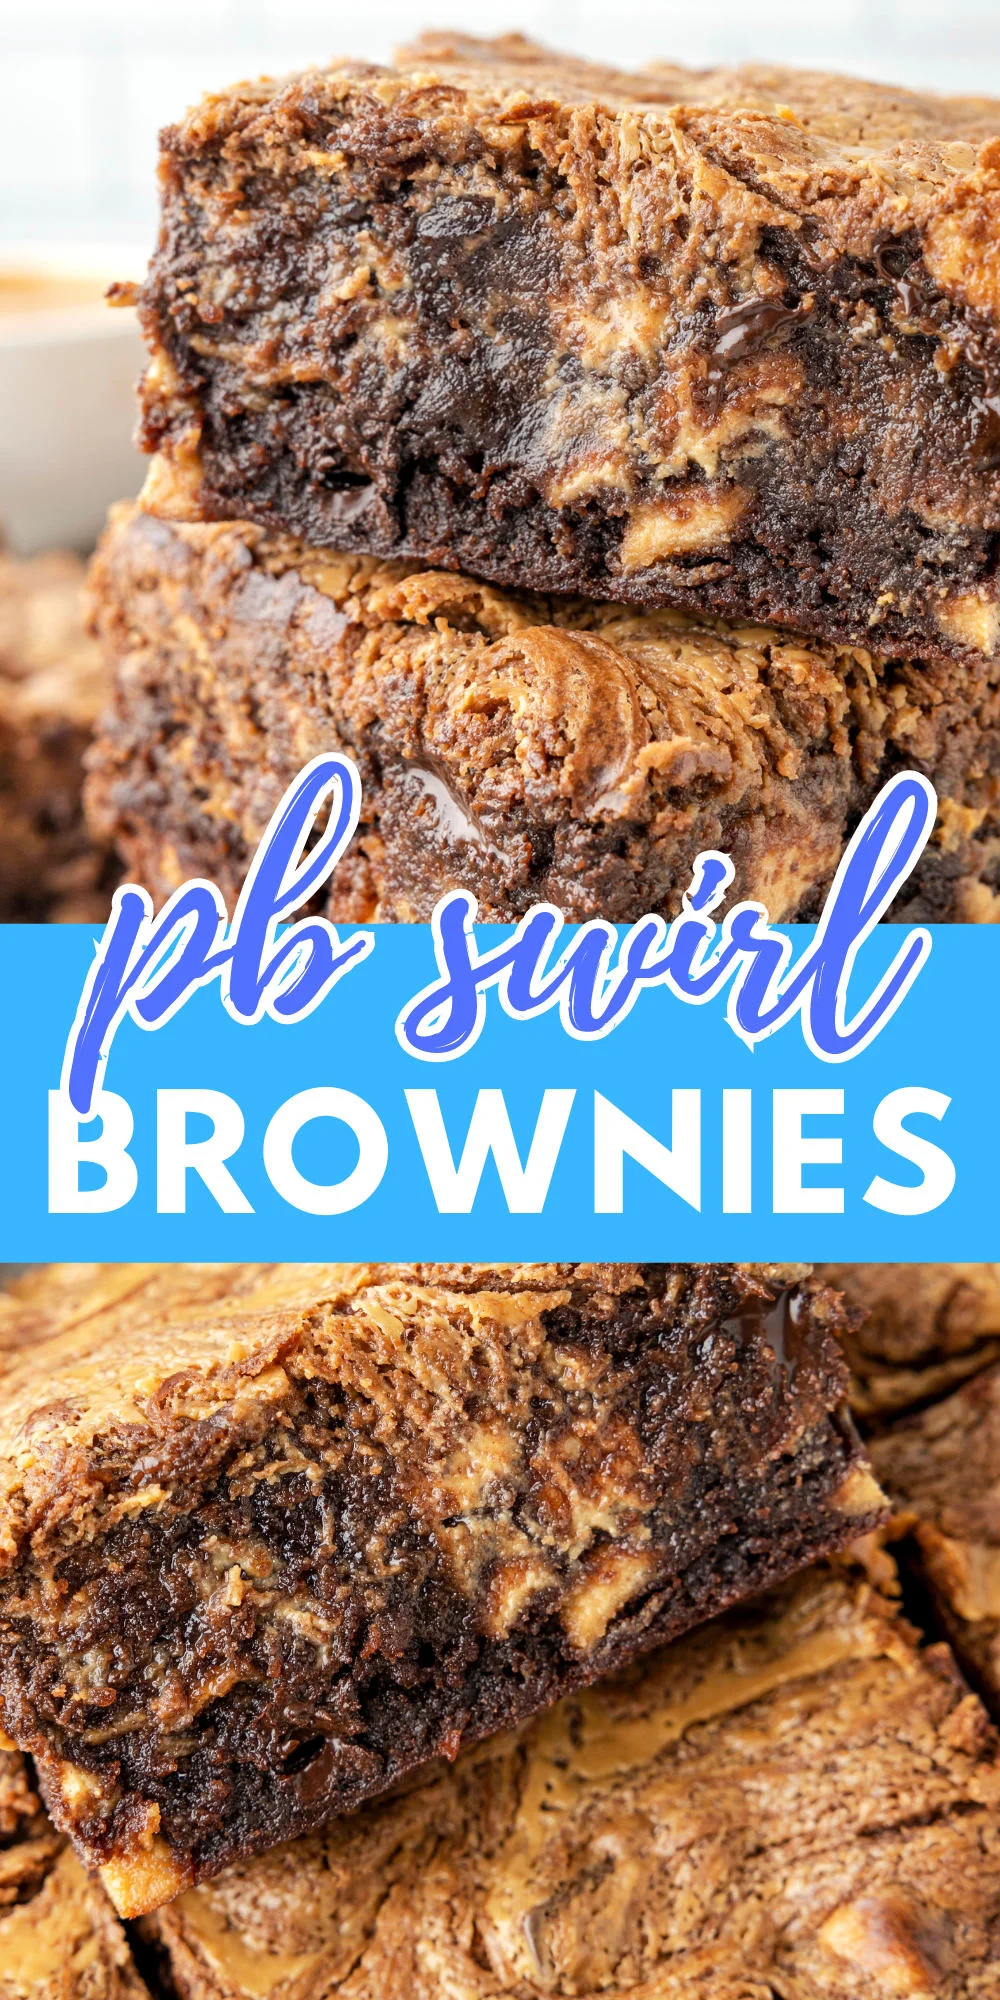 peanut butter swirl brownies promotional image for pinterest